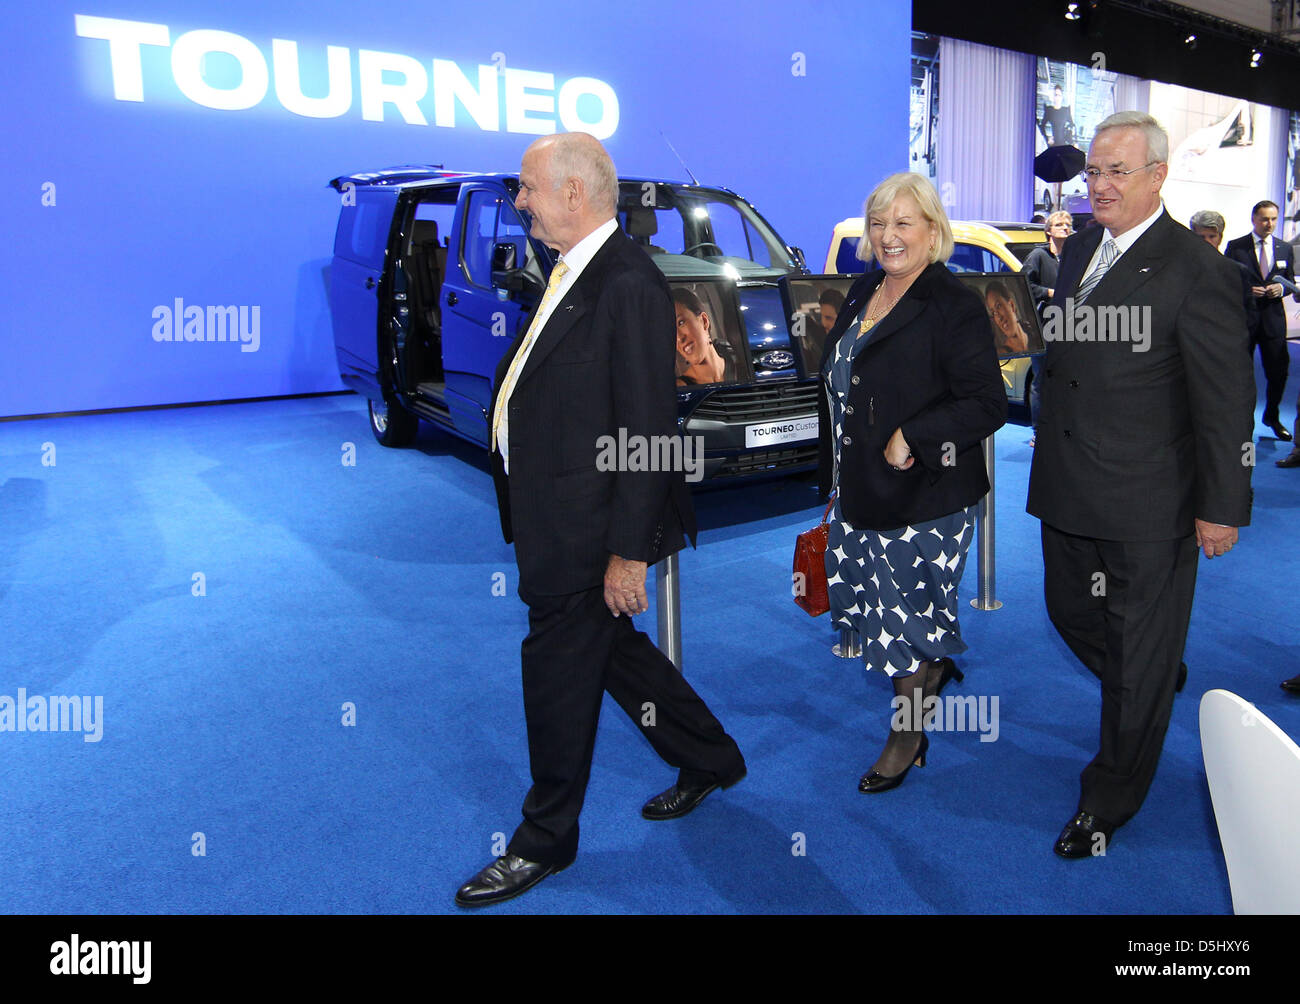 Ferdinand Piech (L-R), chairman of the supervisory board at Volkswagen, Ursula Piech, member of the supervisory board at Volkswagen, and CEO of Volkswagen Martin Winterkorn walk past vehichles at the Ford stand at the IAA Frankfurt Motor Show for commercial vehichles in Hanover, Germany, 18 September 2012. The 64th IAA commercial vehichles fair runs from 20 until 27 September 2012. Stock Photo